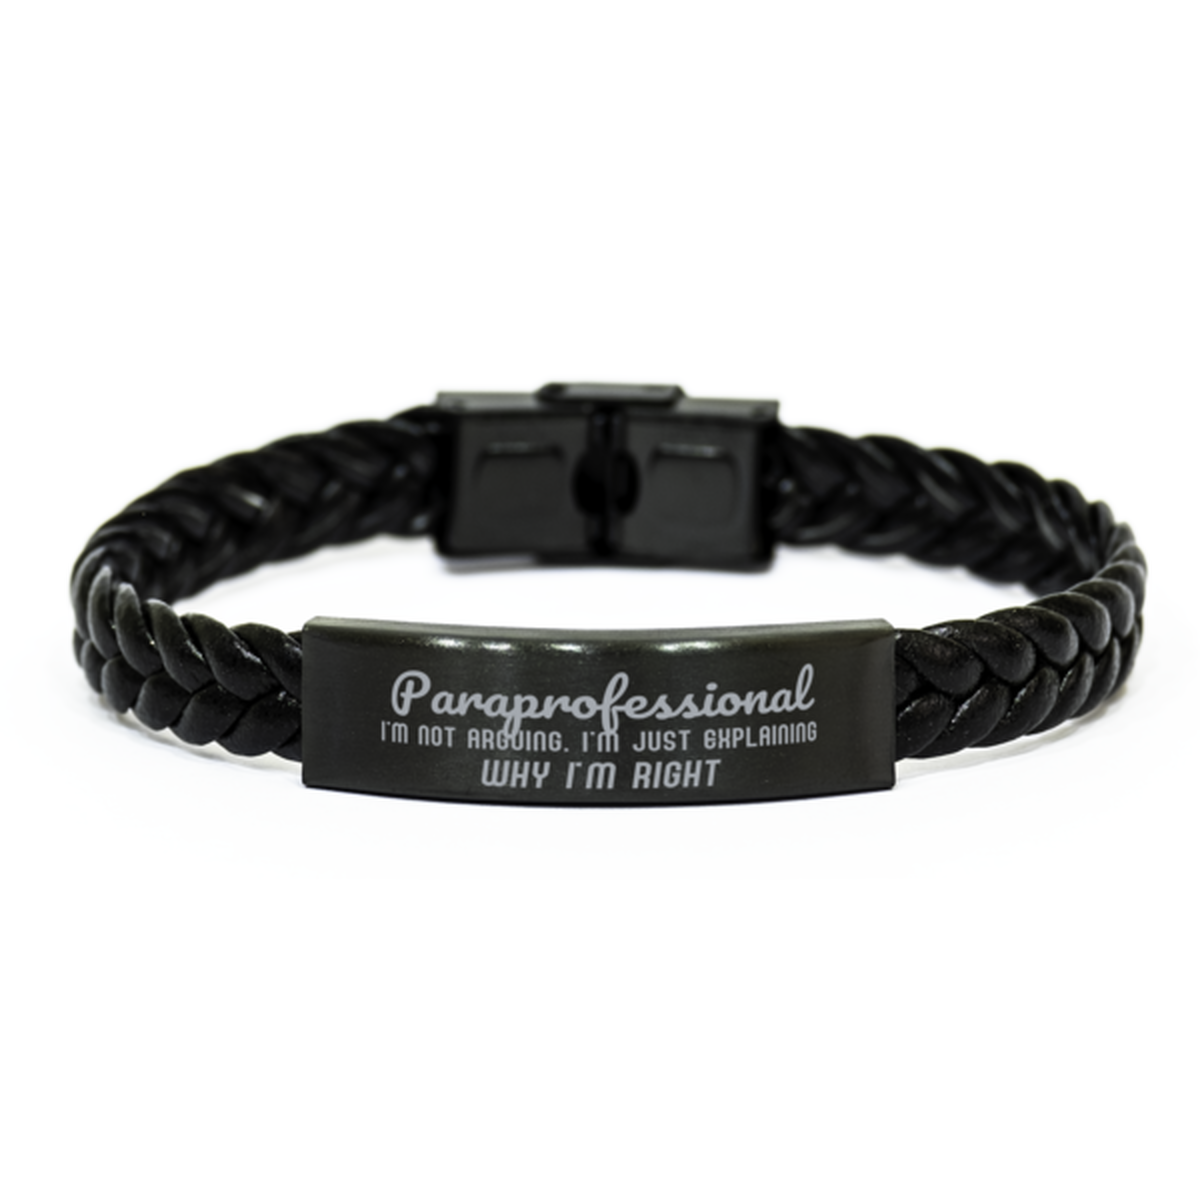 Paraprofessional I'm not Arguing. I'm Just Explaining Why I'm RIGHT Braided Leather Bracelet, Graduation Birthday Christmas Paraprofessional Gifts For Paraprofessional Funny Saying Quote Present for Men Women Coworker